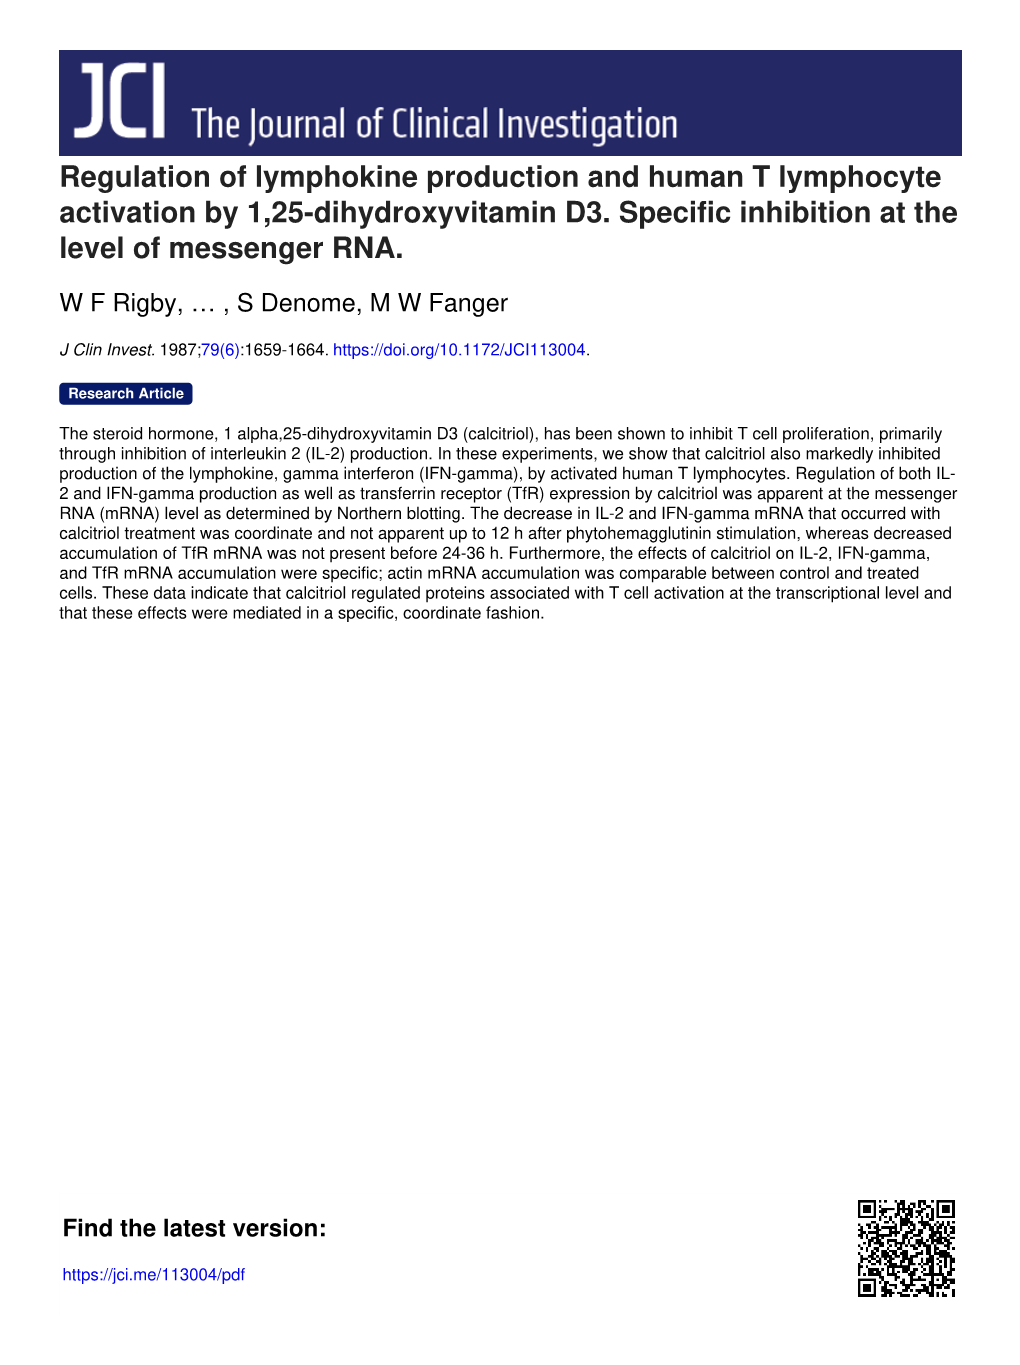 Regulation of Lymphokine Production and Human T Lymphocyte Activation by 1,25-Dihydroxyvitamin D3. Specific Inhibition at the Level of Messenger RNA